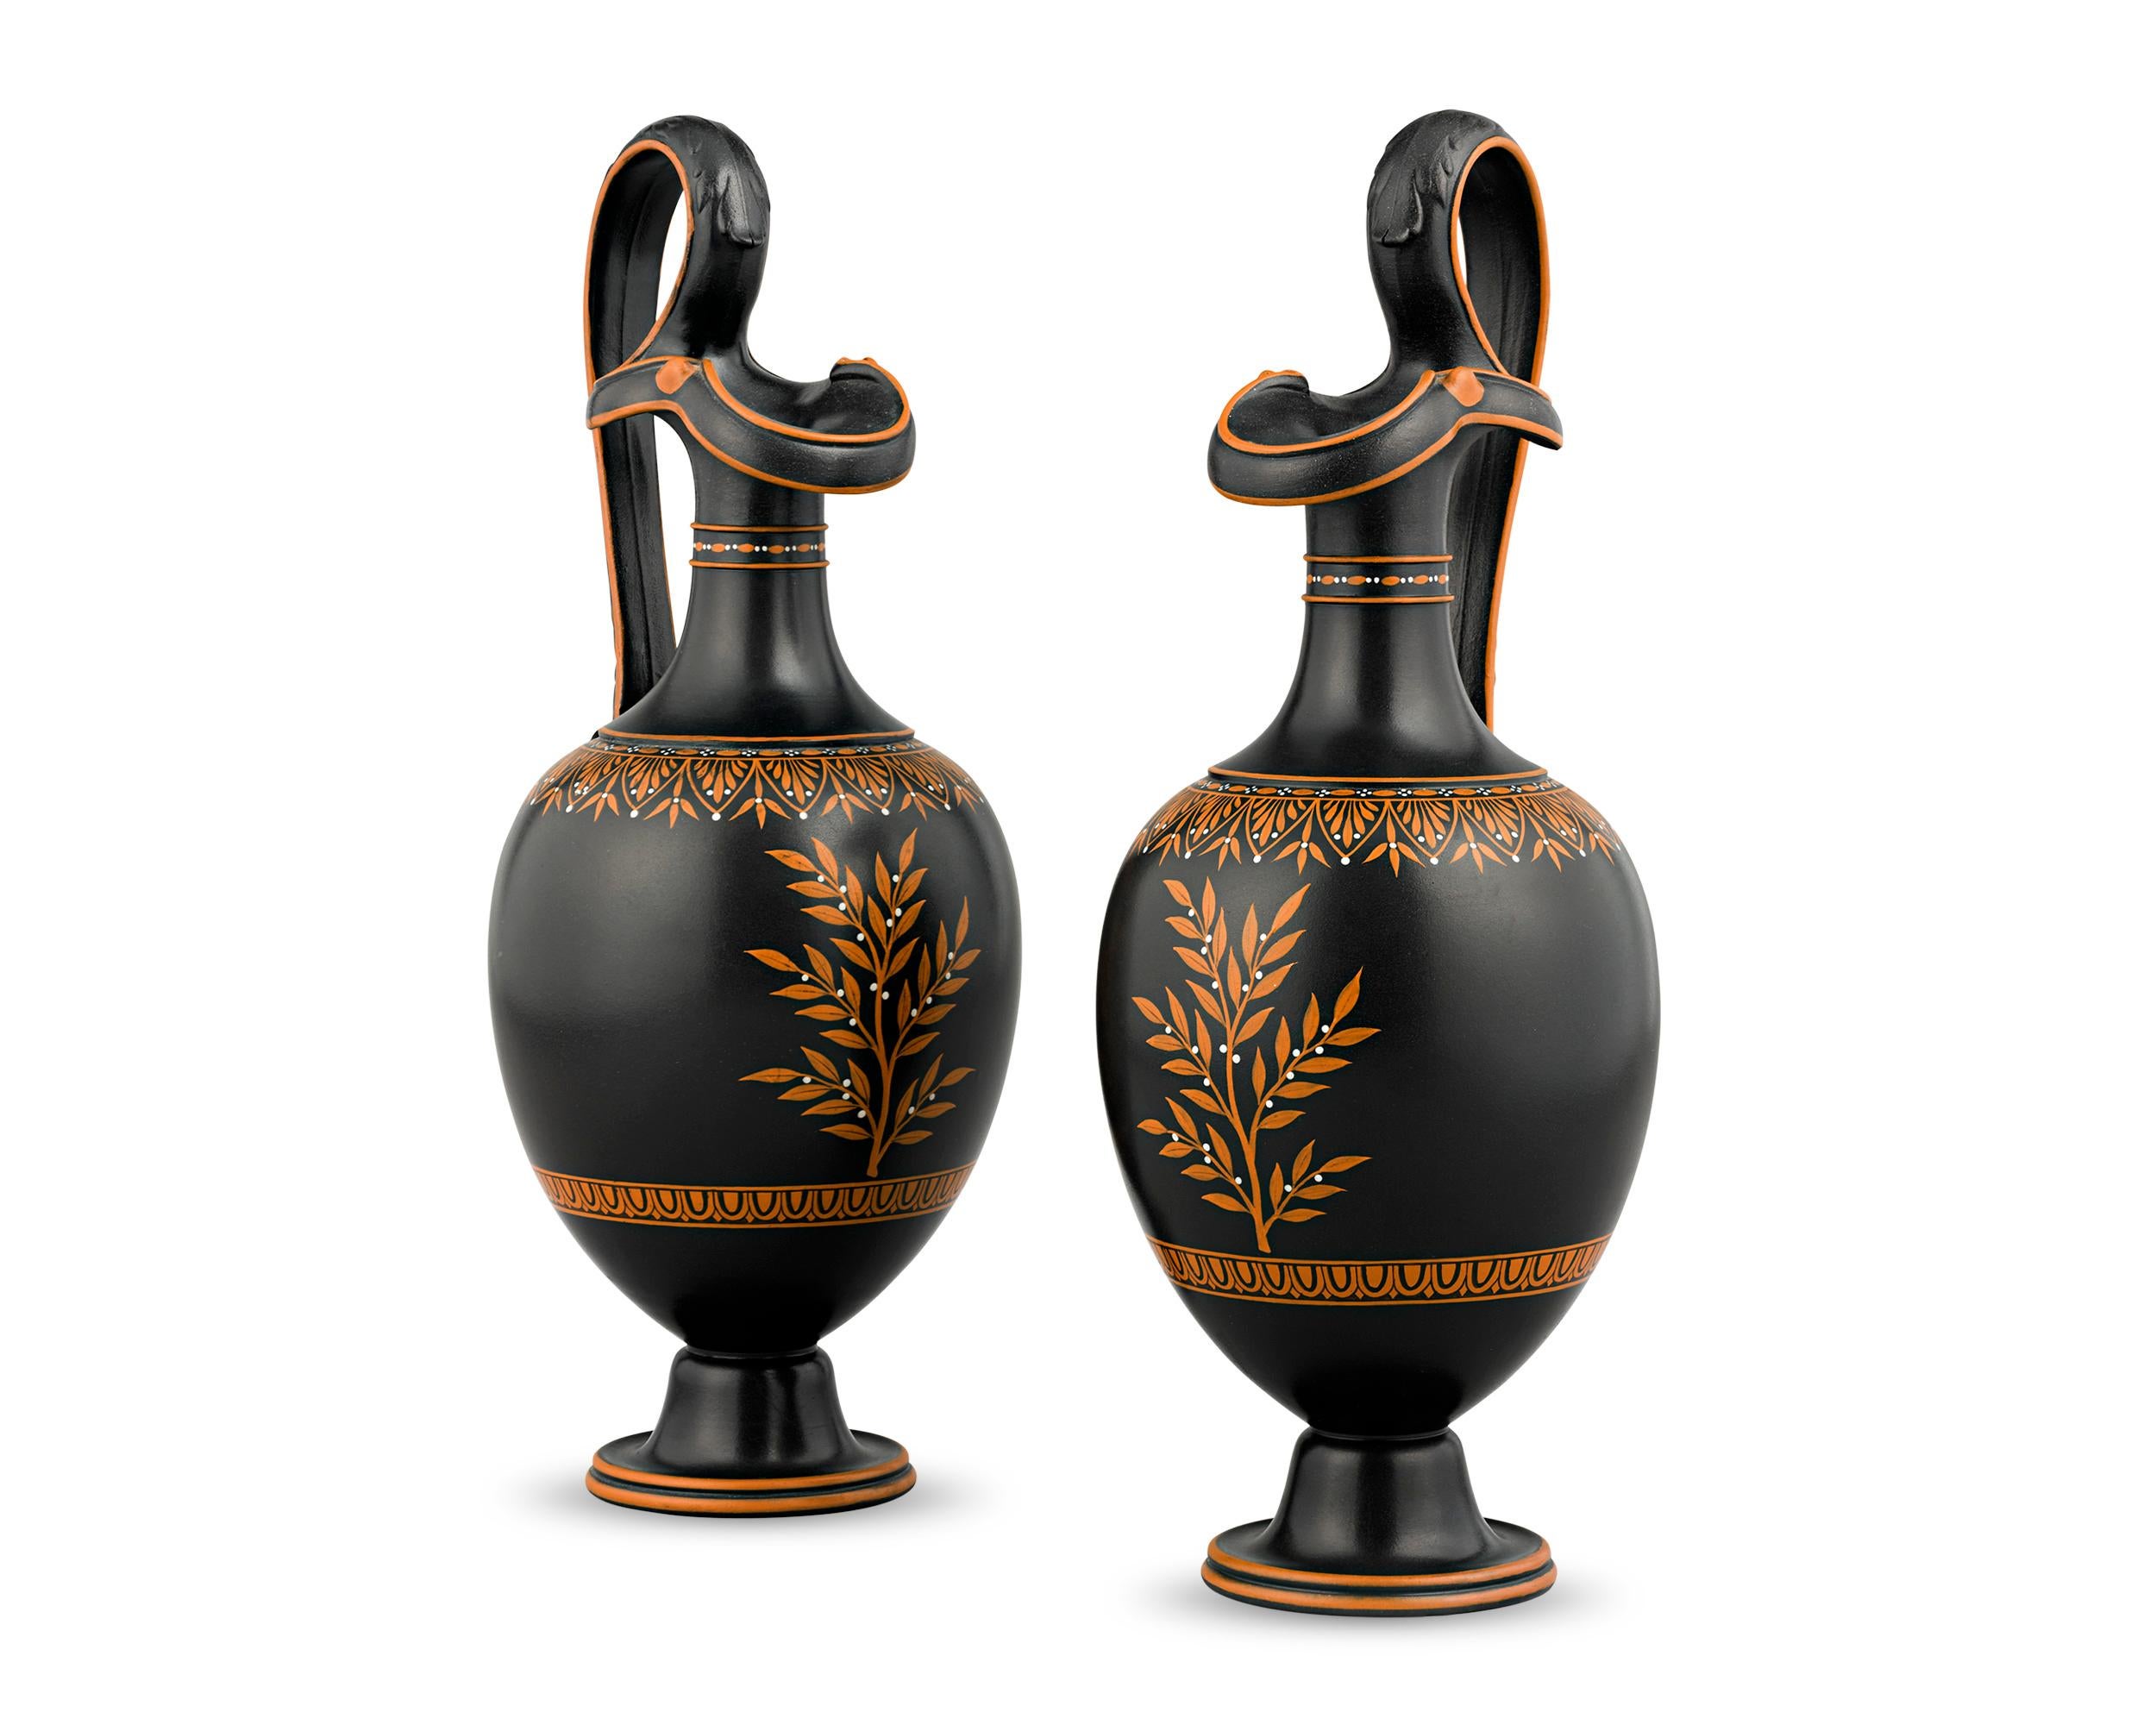 Crafted by Wedgwood, this pair of 18th century neoclassical oenochoe, or wine jugs, are comprised of black basalt — largely considered the firm’s greatest innovation. Decorations of terracotta red and white encaustic enamel adorn the handled vases,